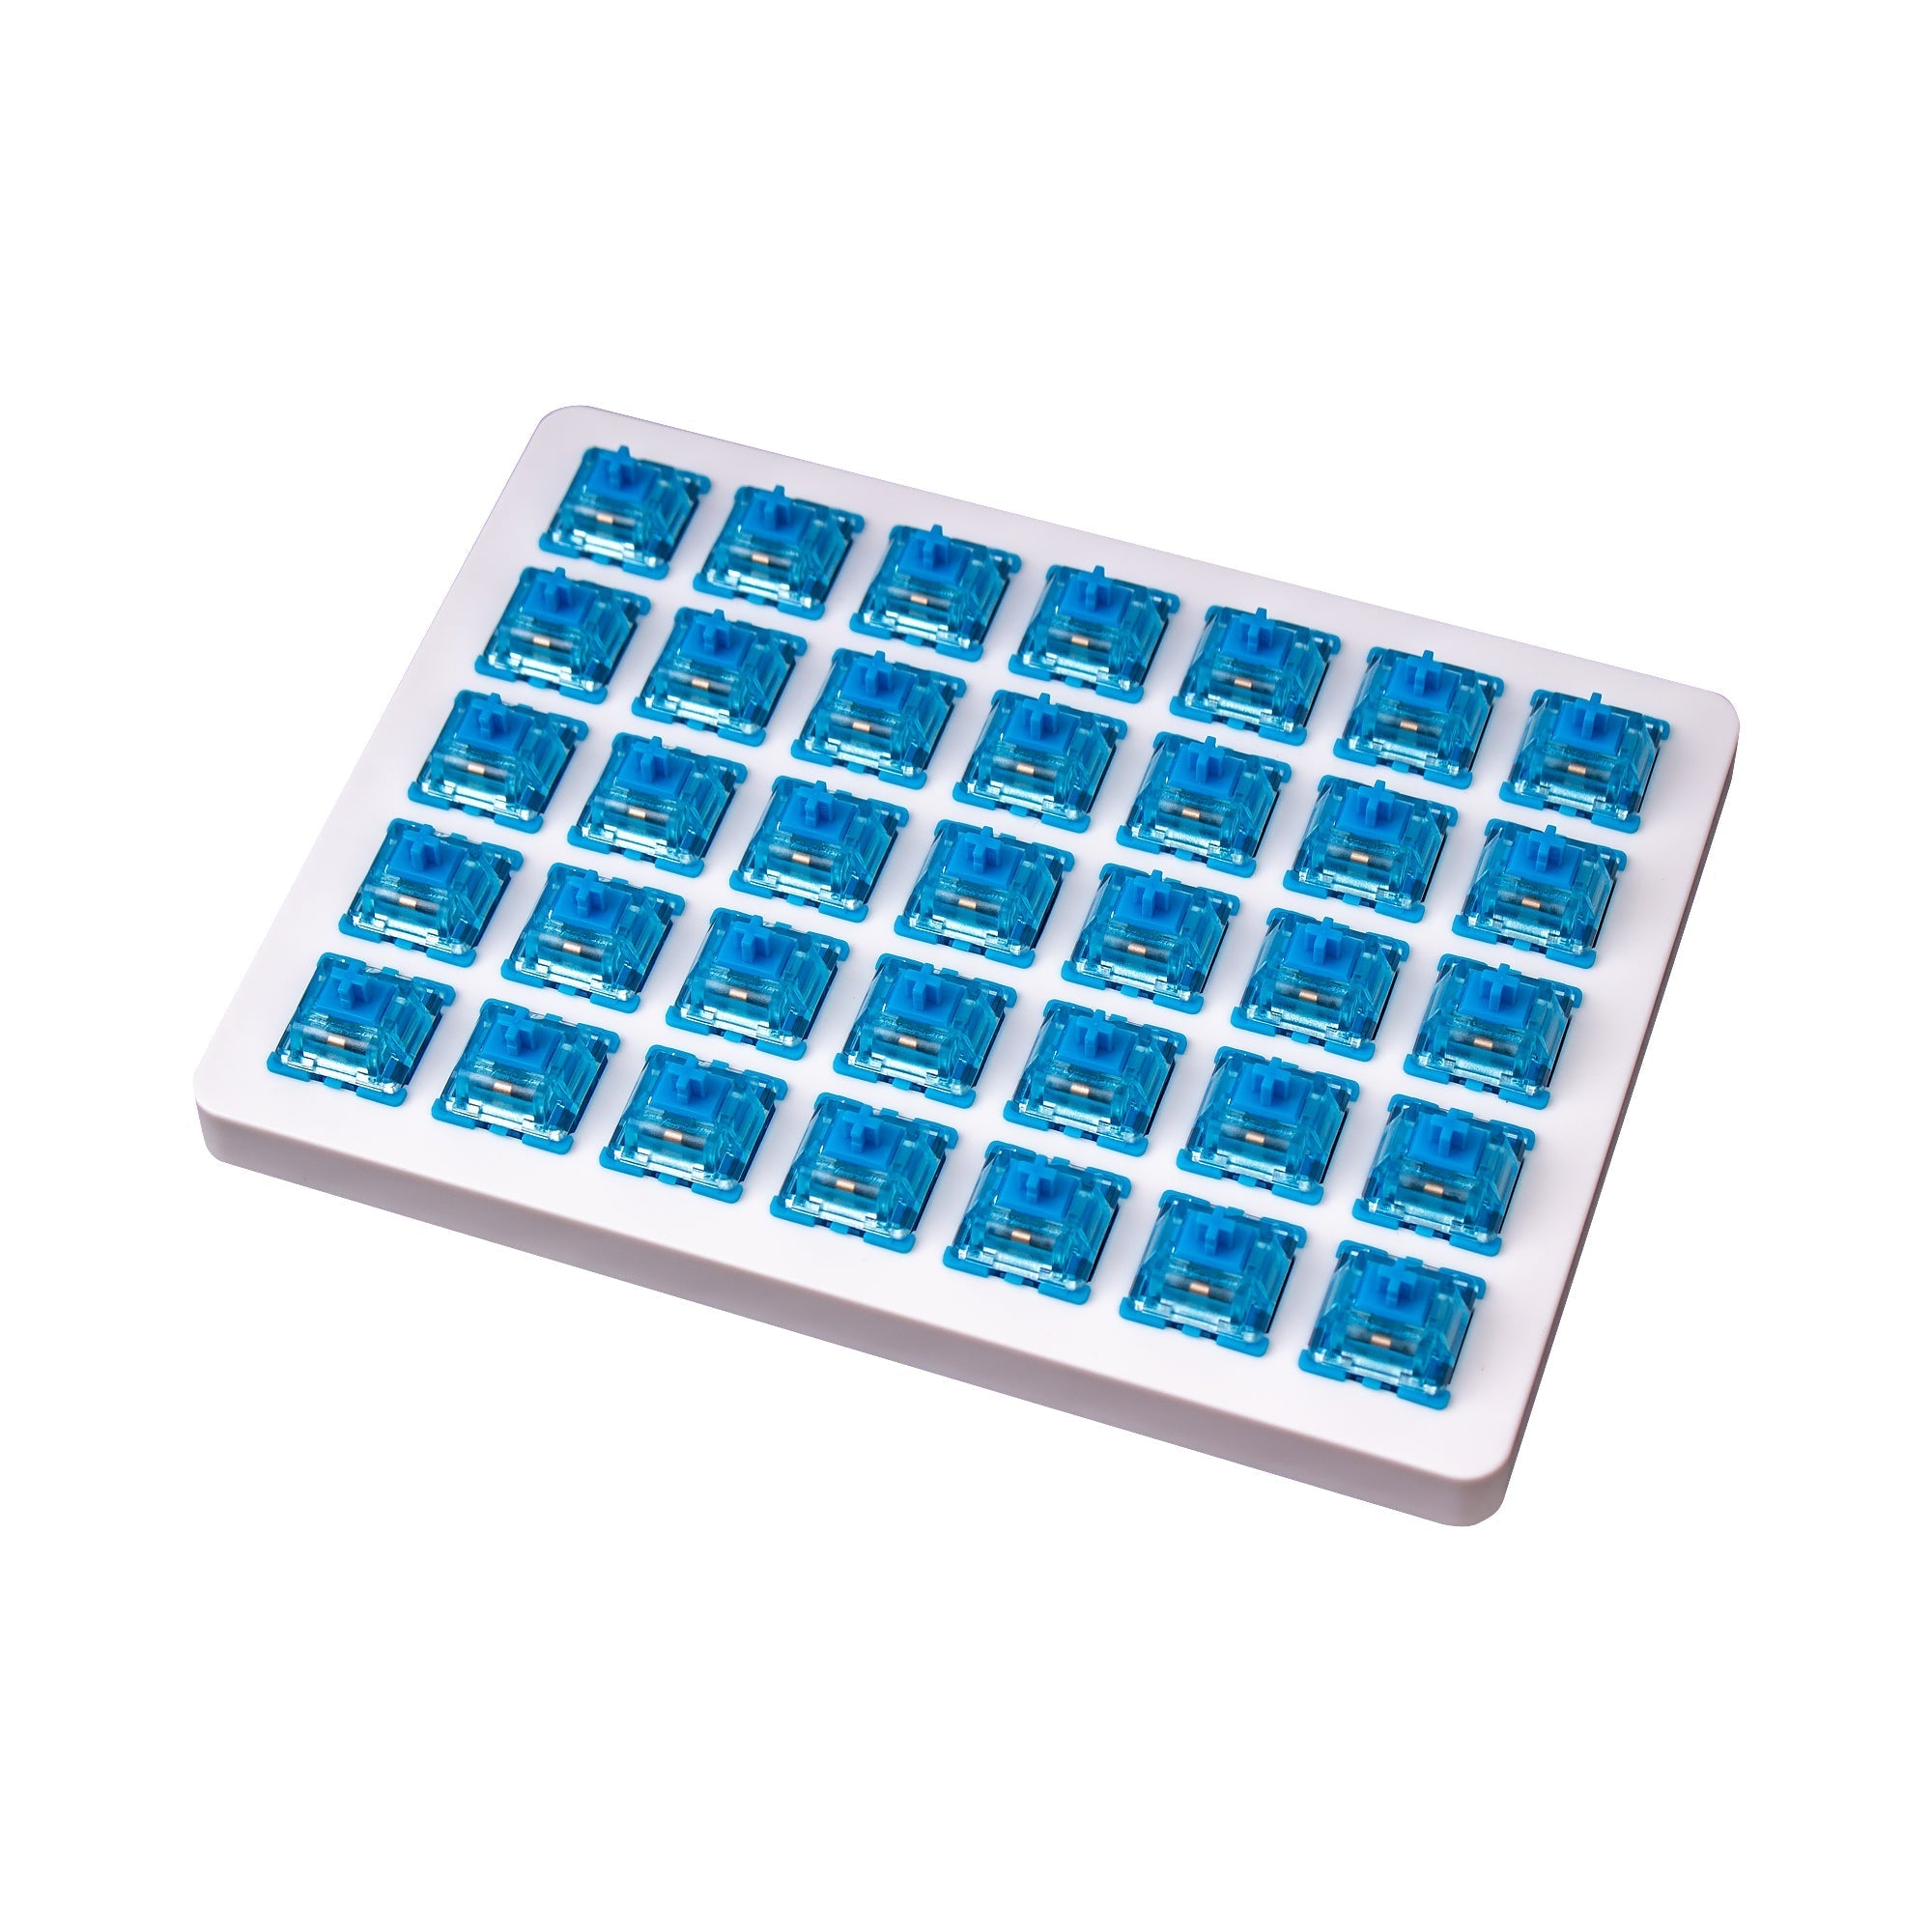 gateron phantom switches are designed to deliver a premium smooth and tactile typing experience. 